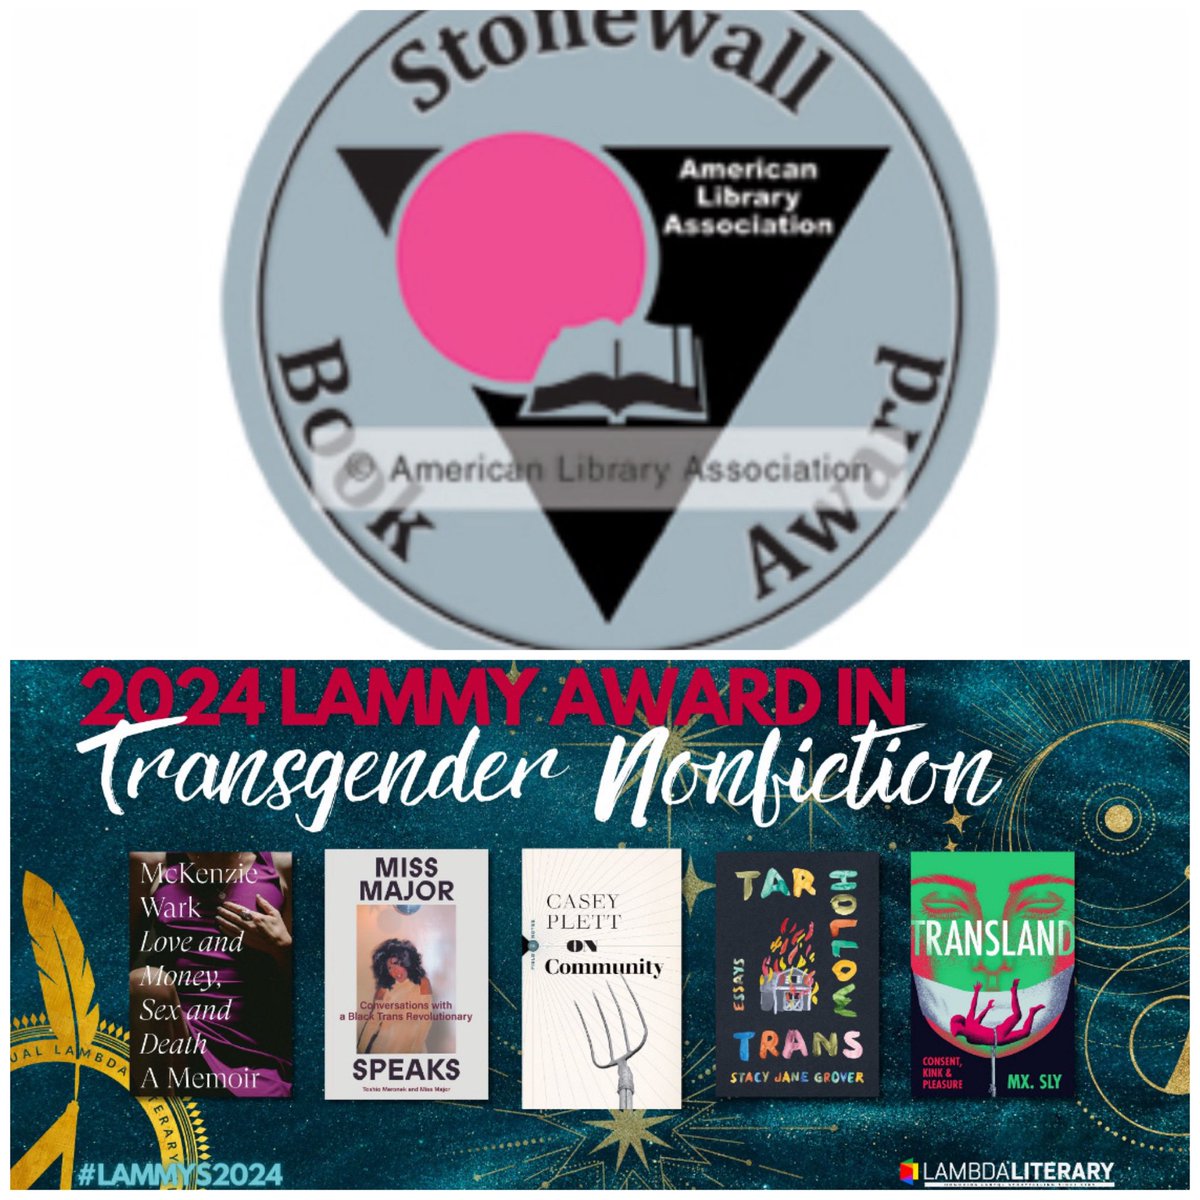 MISS MAJOR SPEAKS is a 2024 ALA Stonewall Book Award Winner and was just nominated for a Lambda Literary Award, nice!